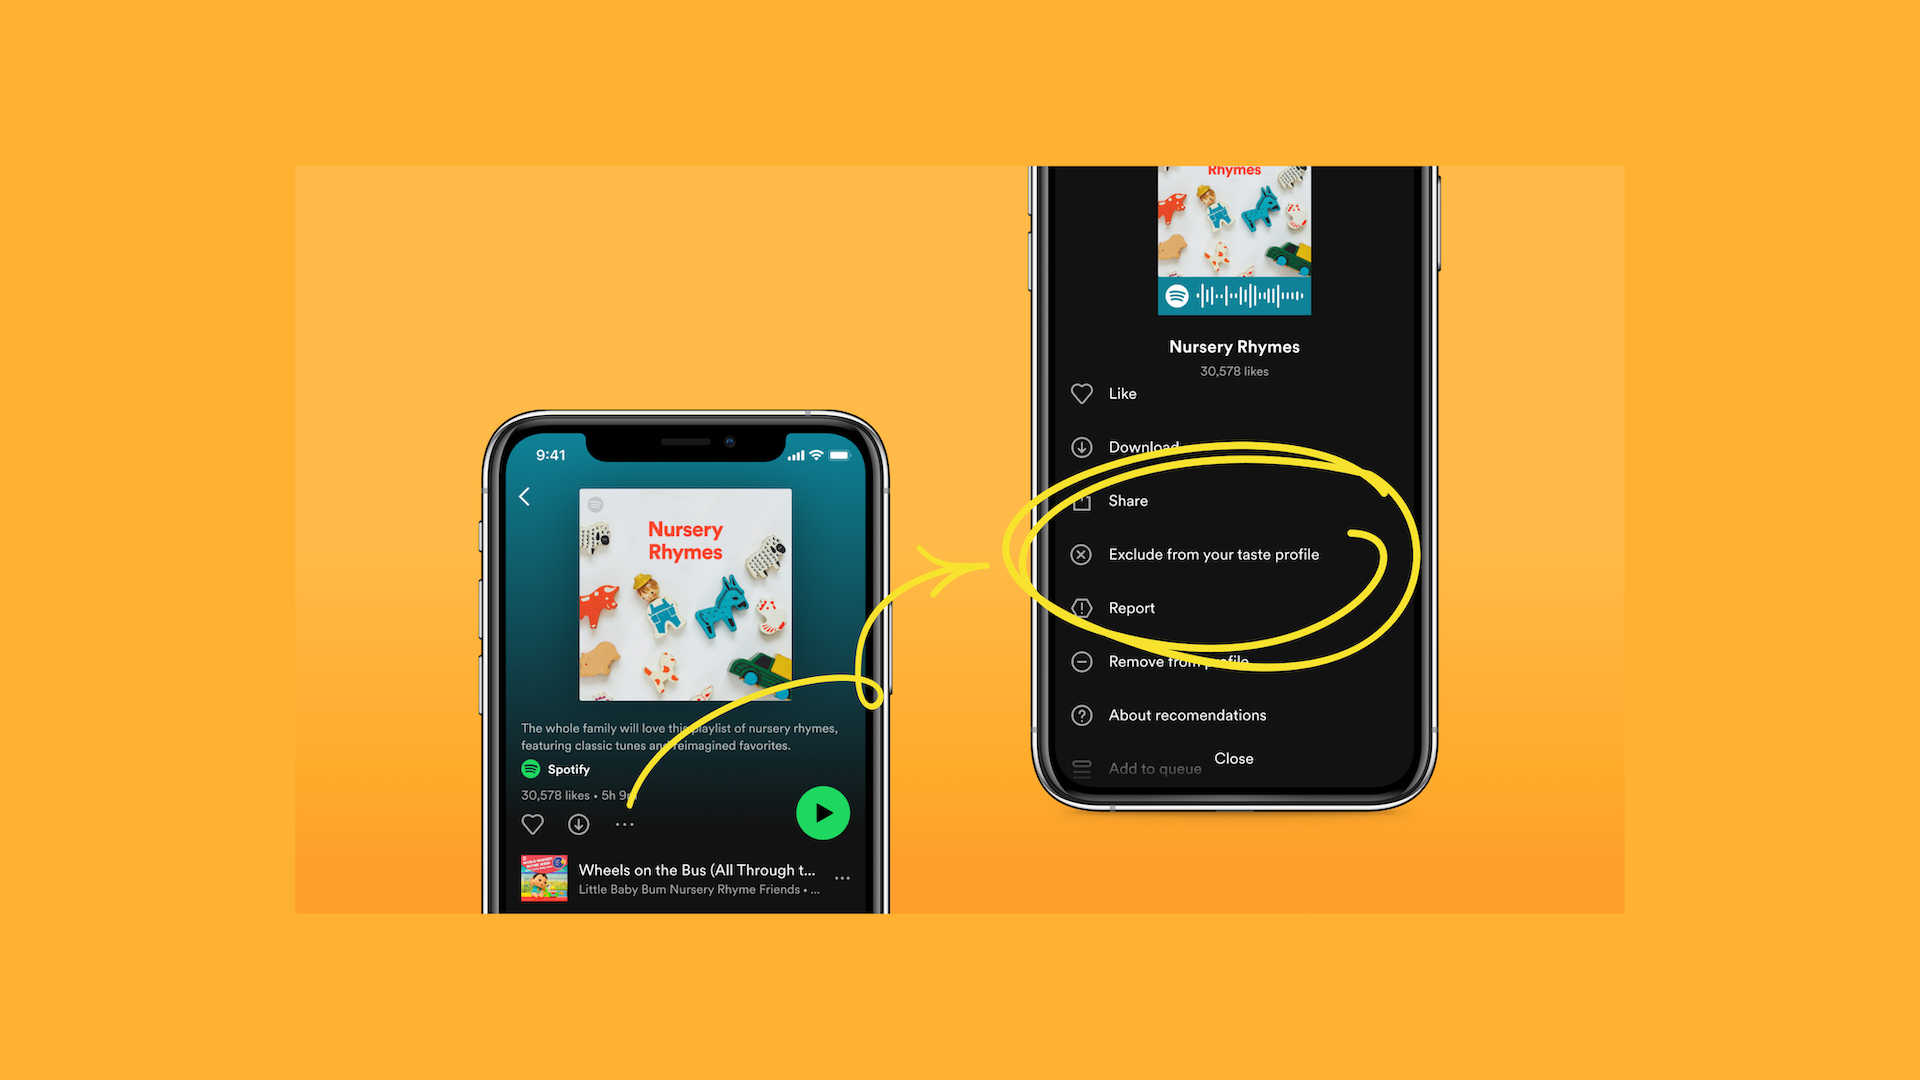 How to optimize the Spotify app to use less cellular data